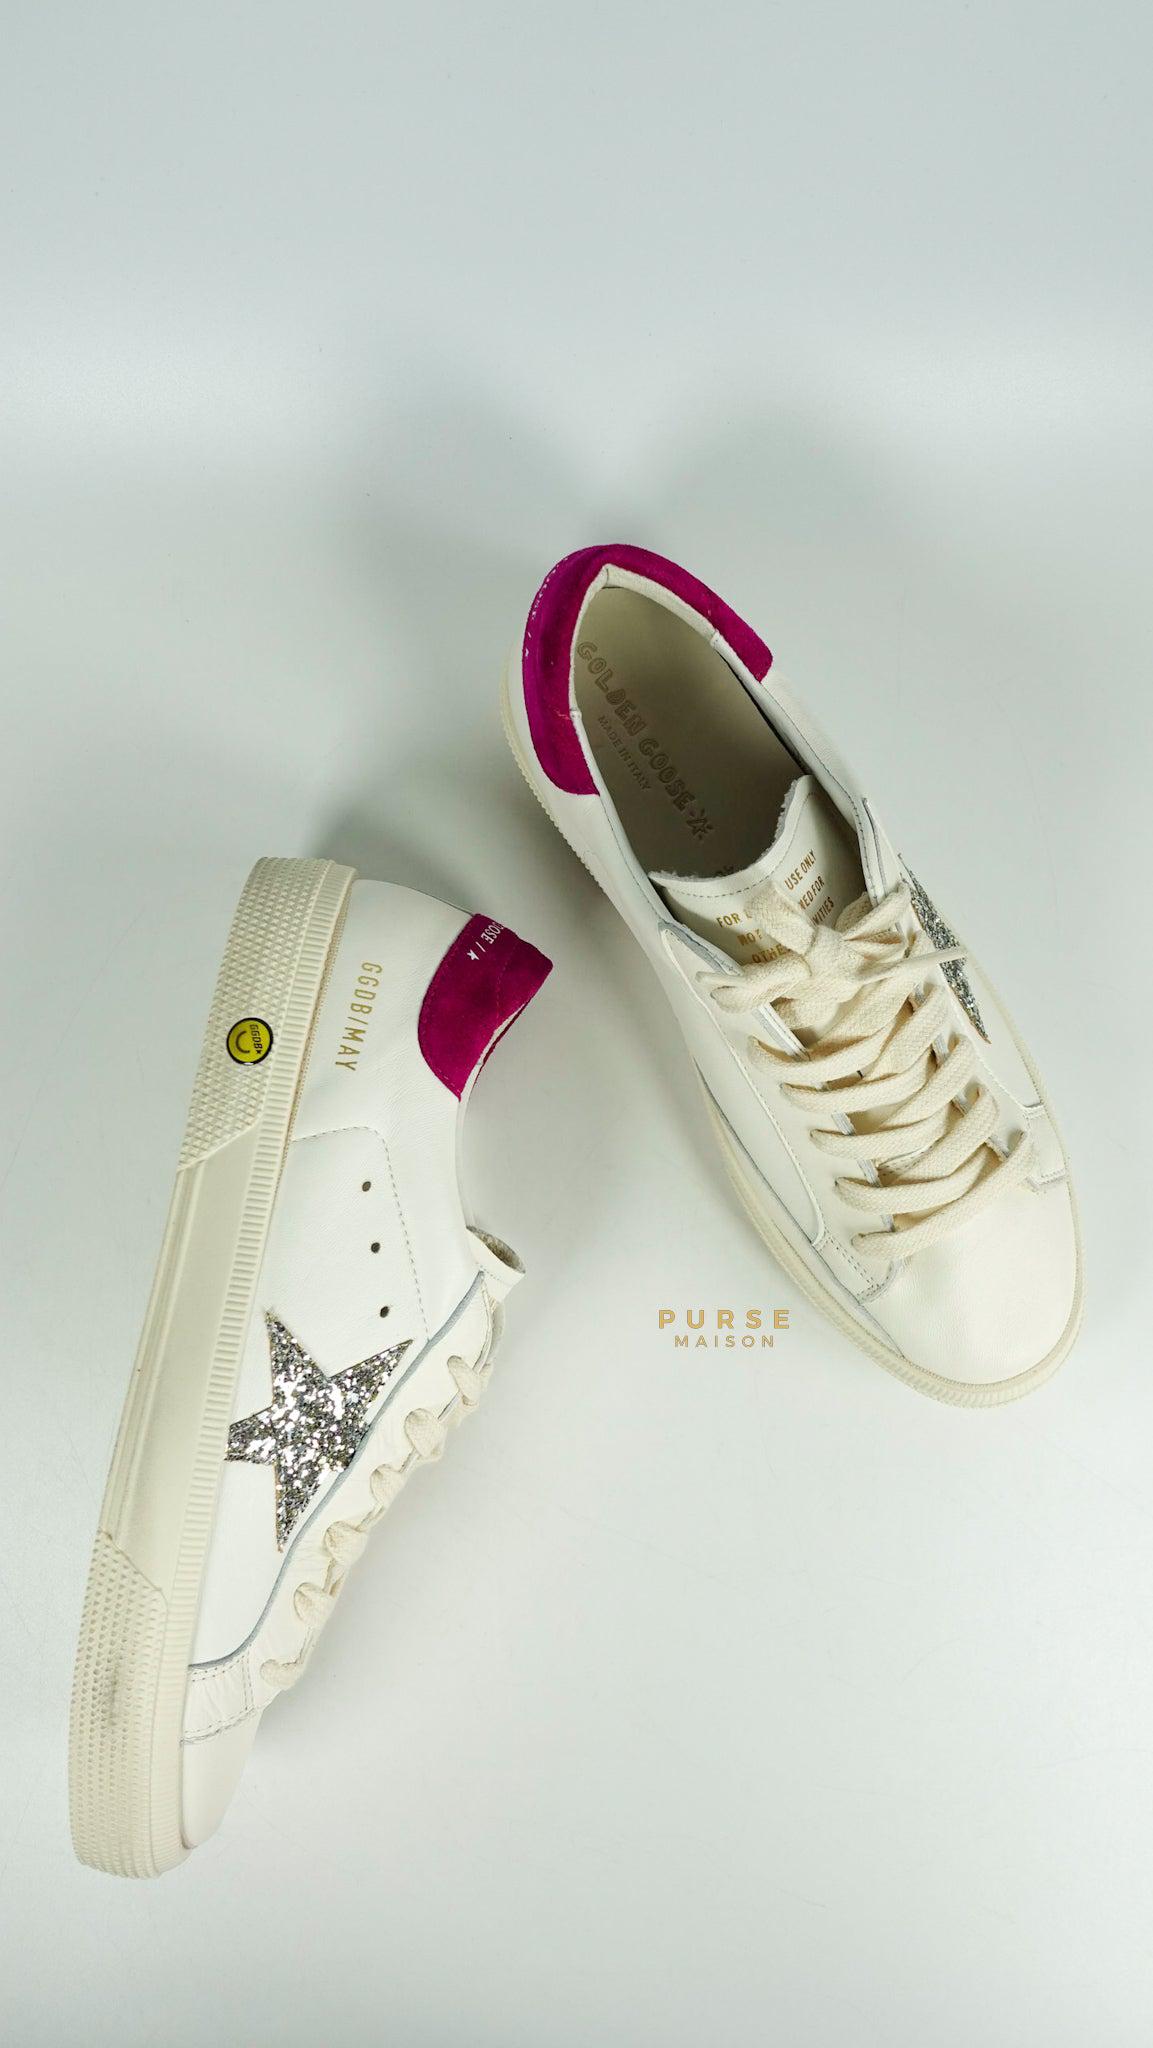 Golden Goose Women’s One Star Logo-Low Top Sneakers White/Violet Size 40 EUR